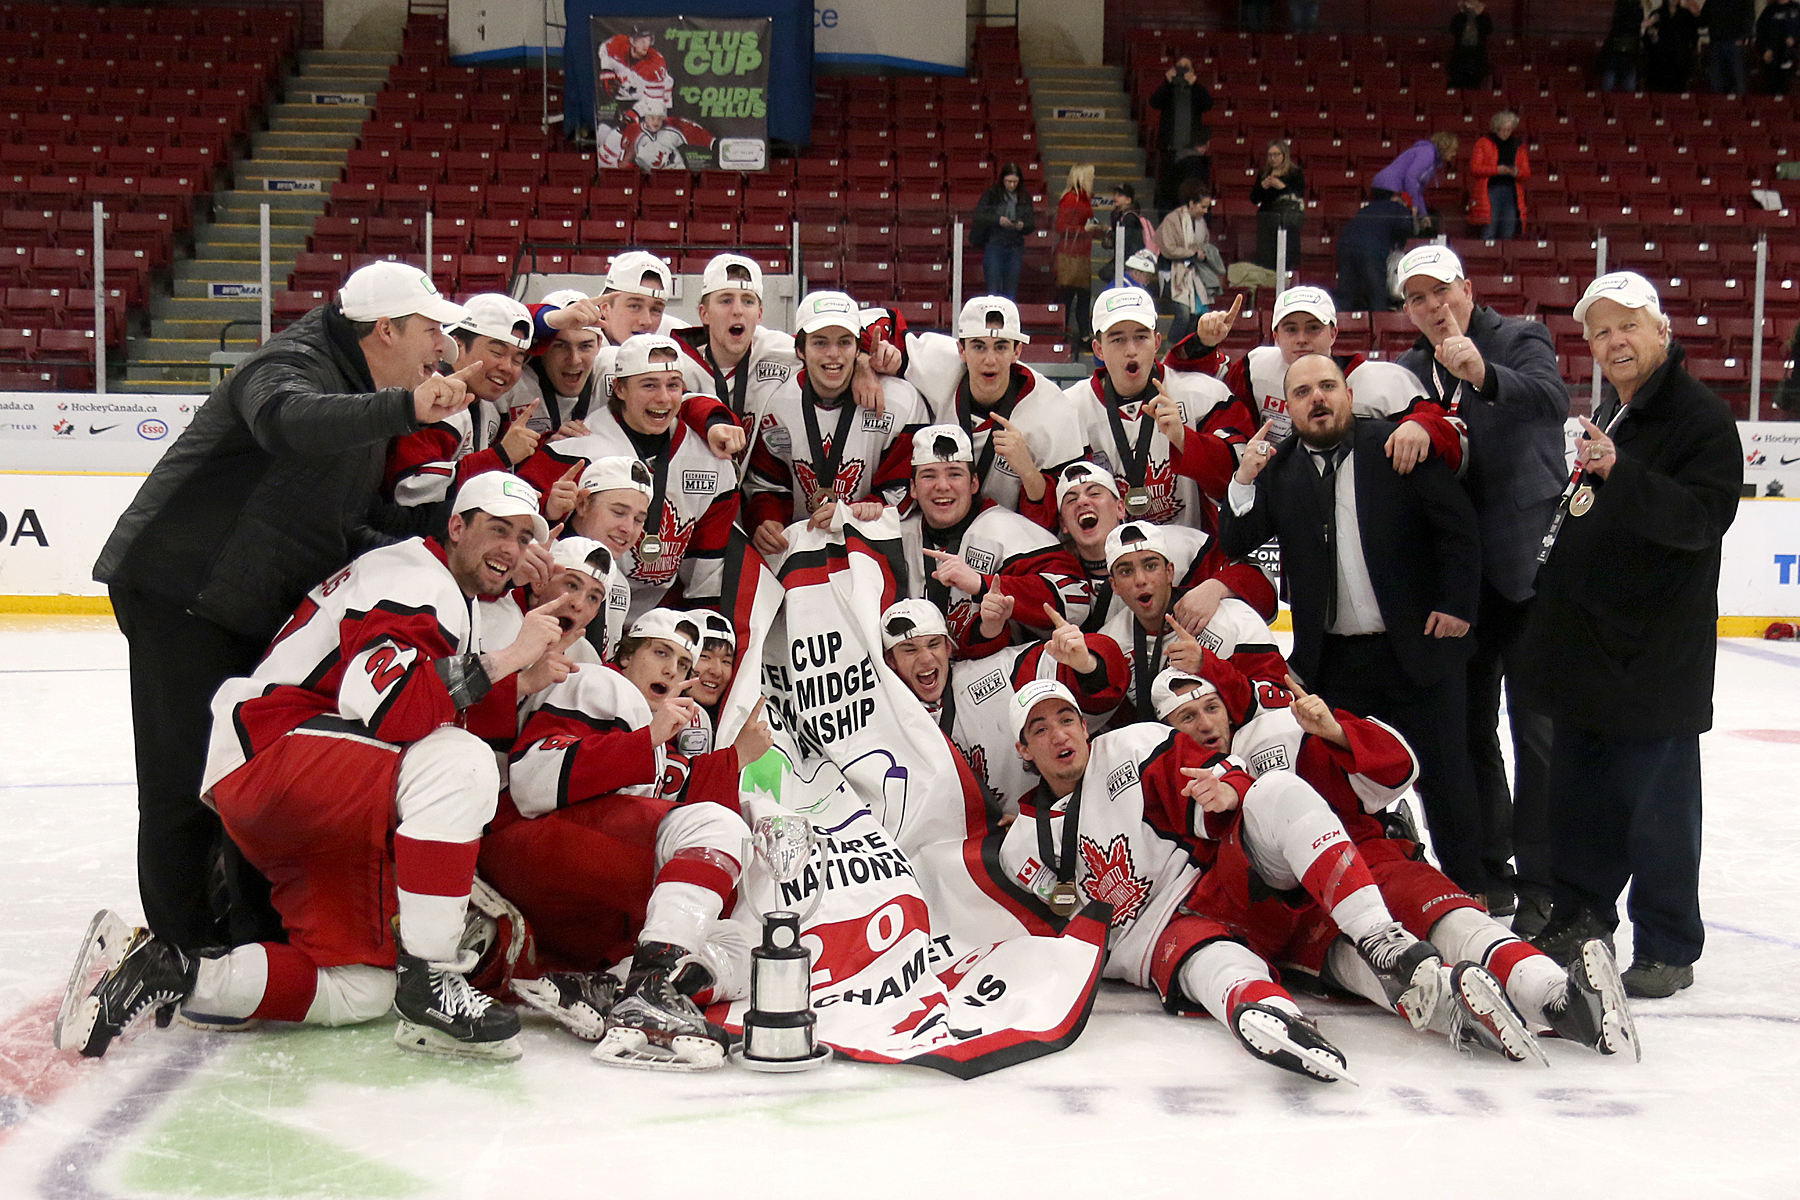 From the TELUS Cup to Team Canada